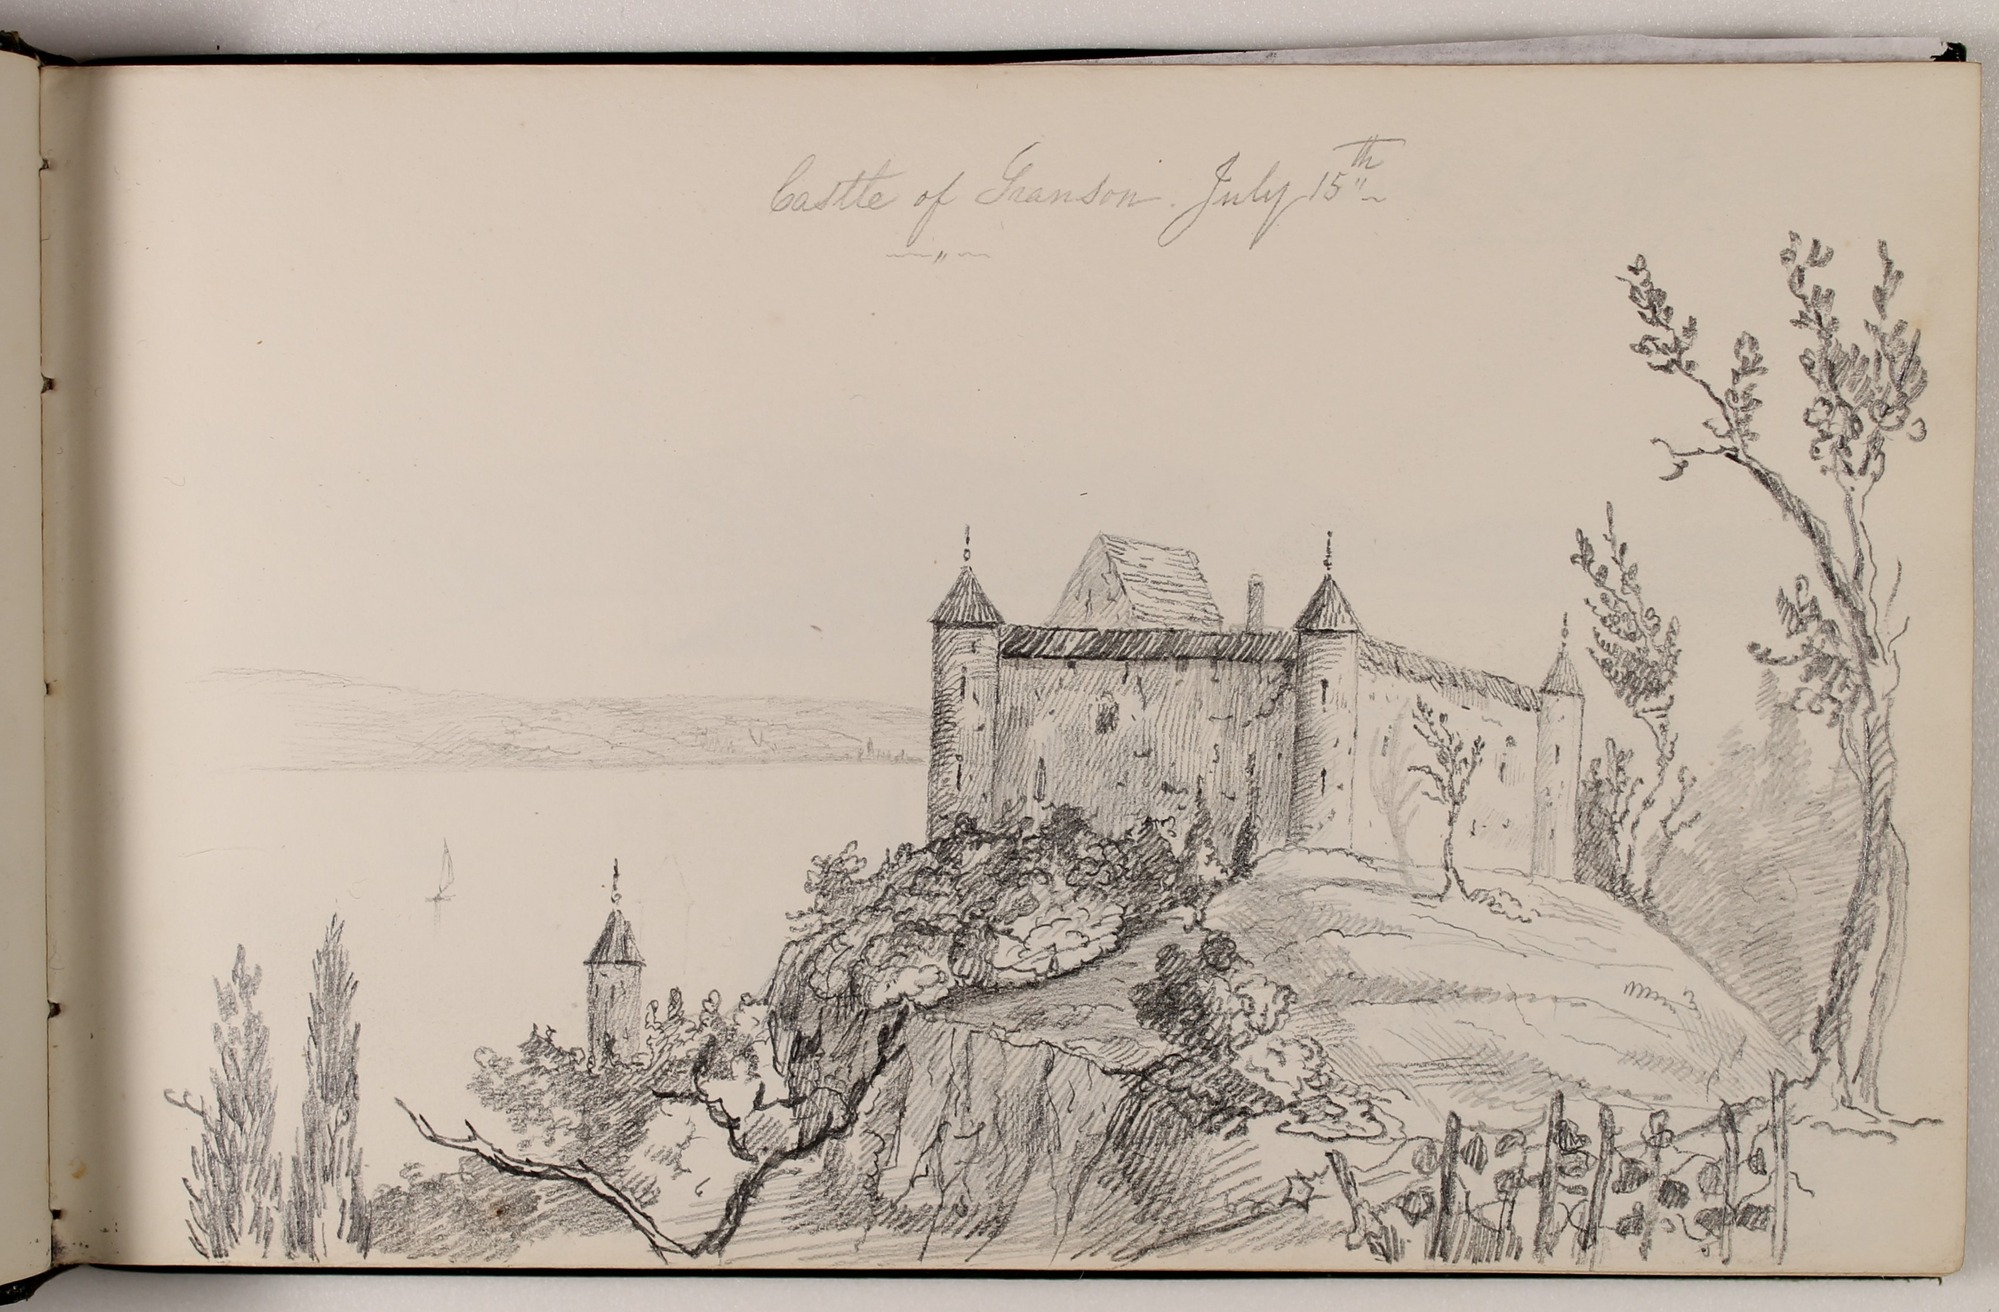 Pencil drawing in sketchbook of square castle on a hill with lake in background